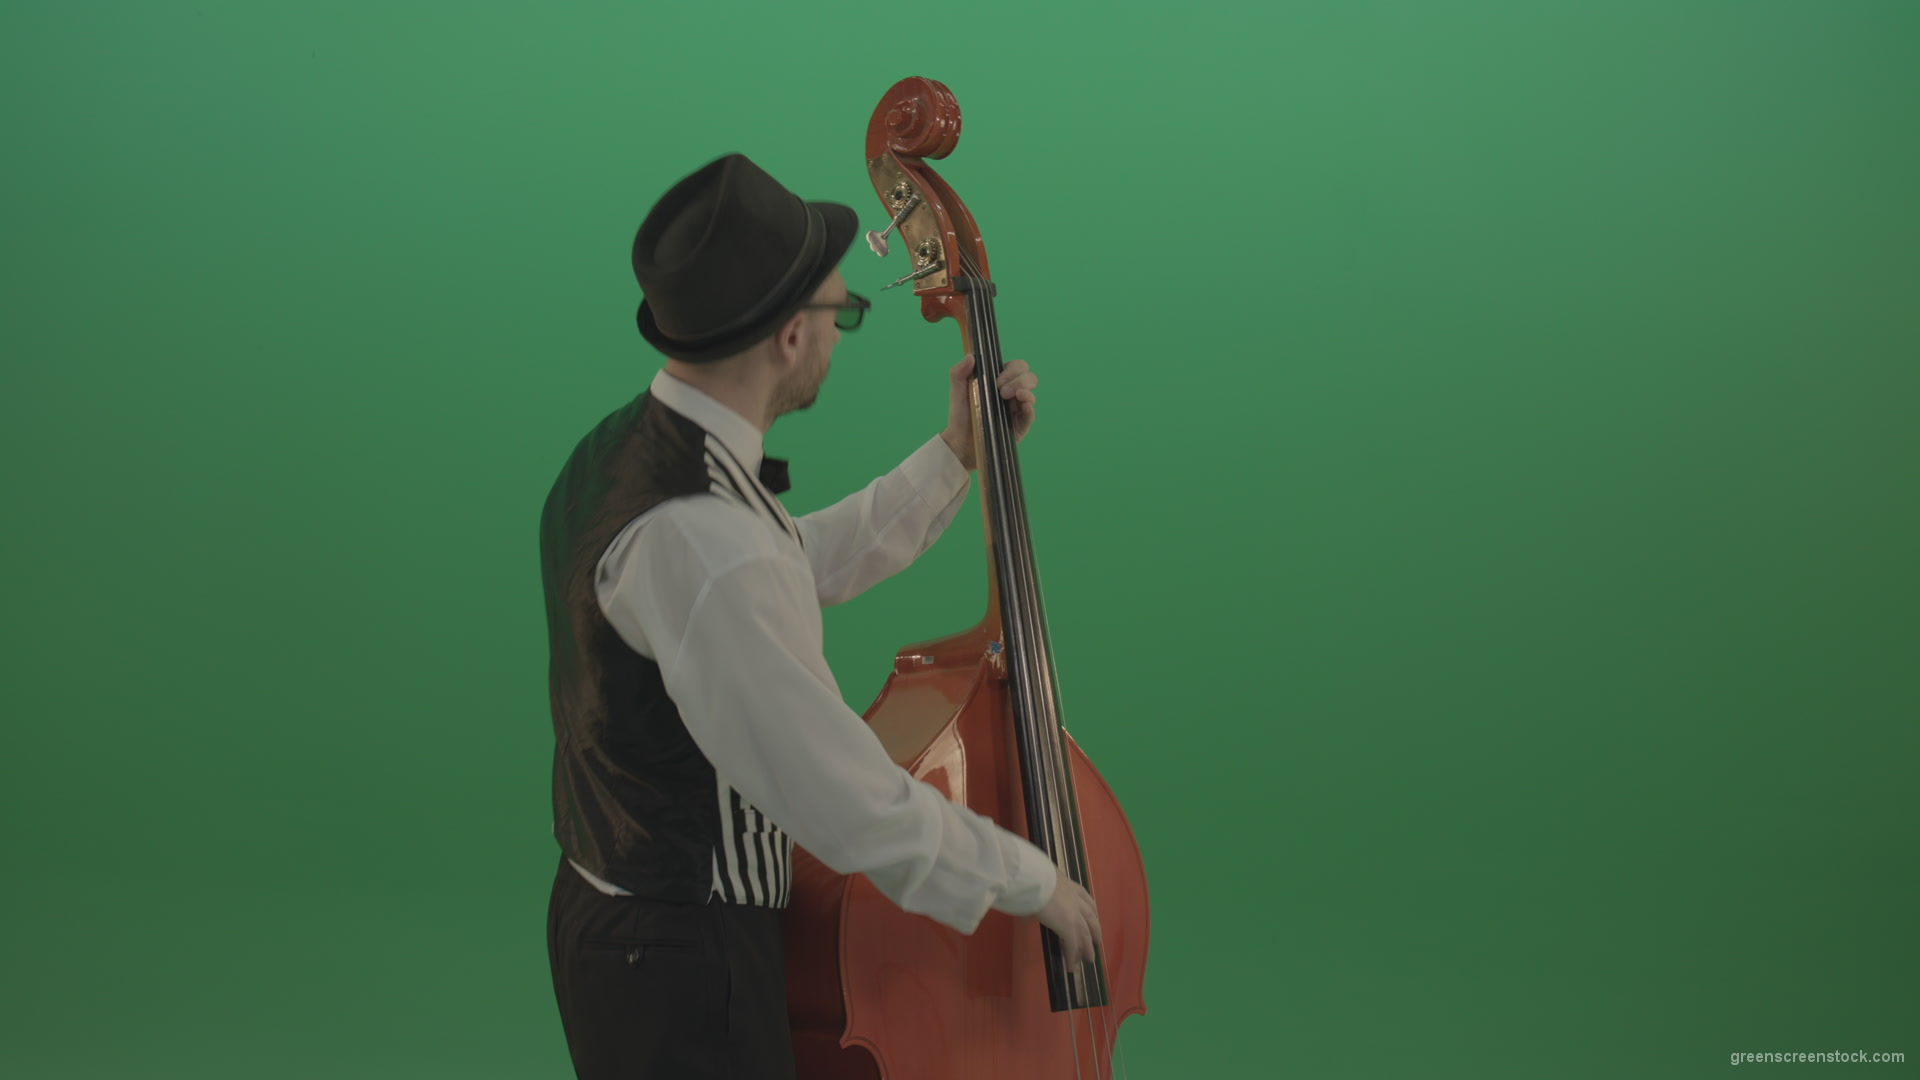 Young-Man-play-jazz-on-double-bass-String-music-instrument-isolated-on-green-screen-in-back-side-view_007 Green Screen Stock